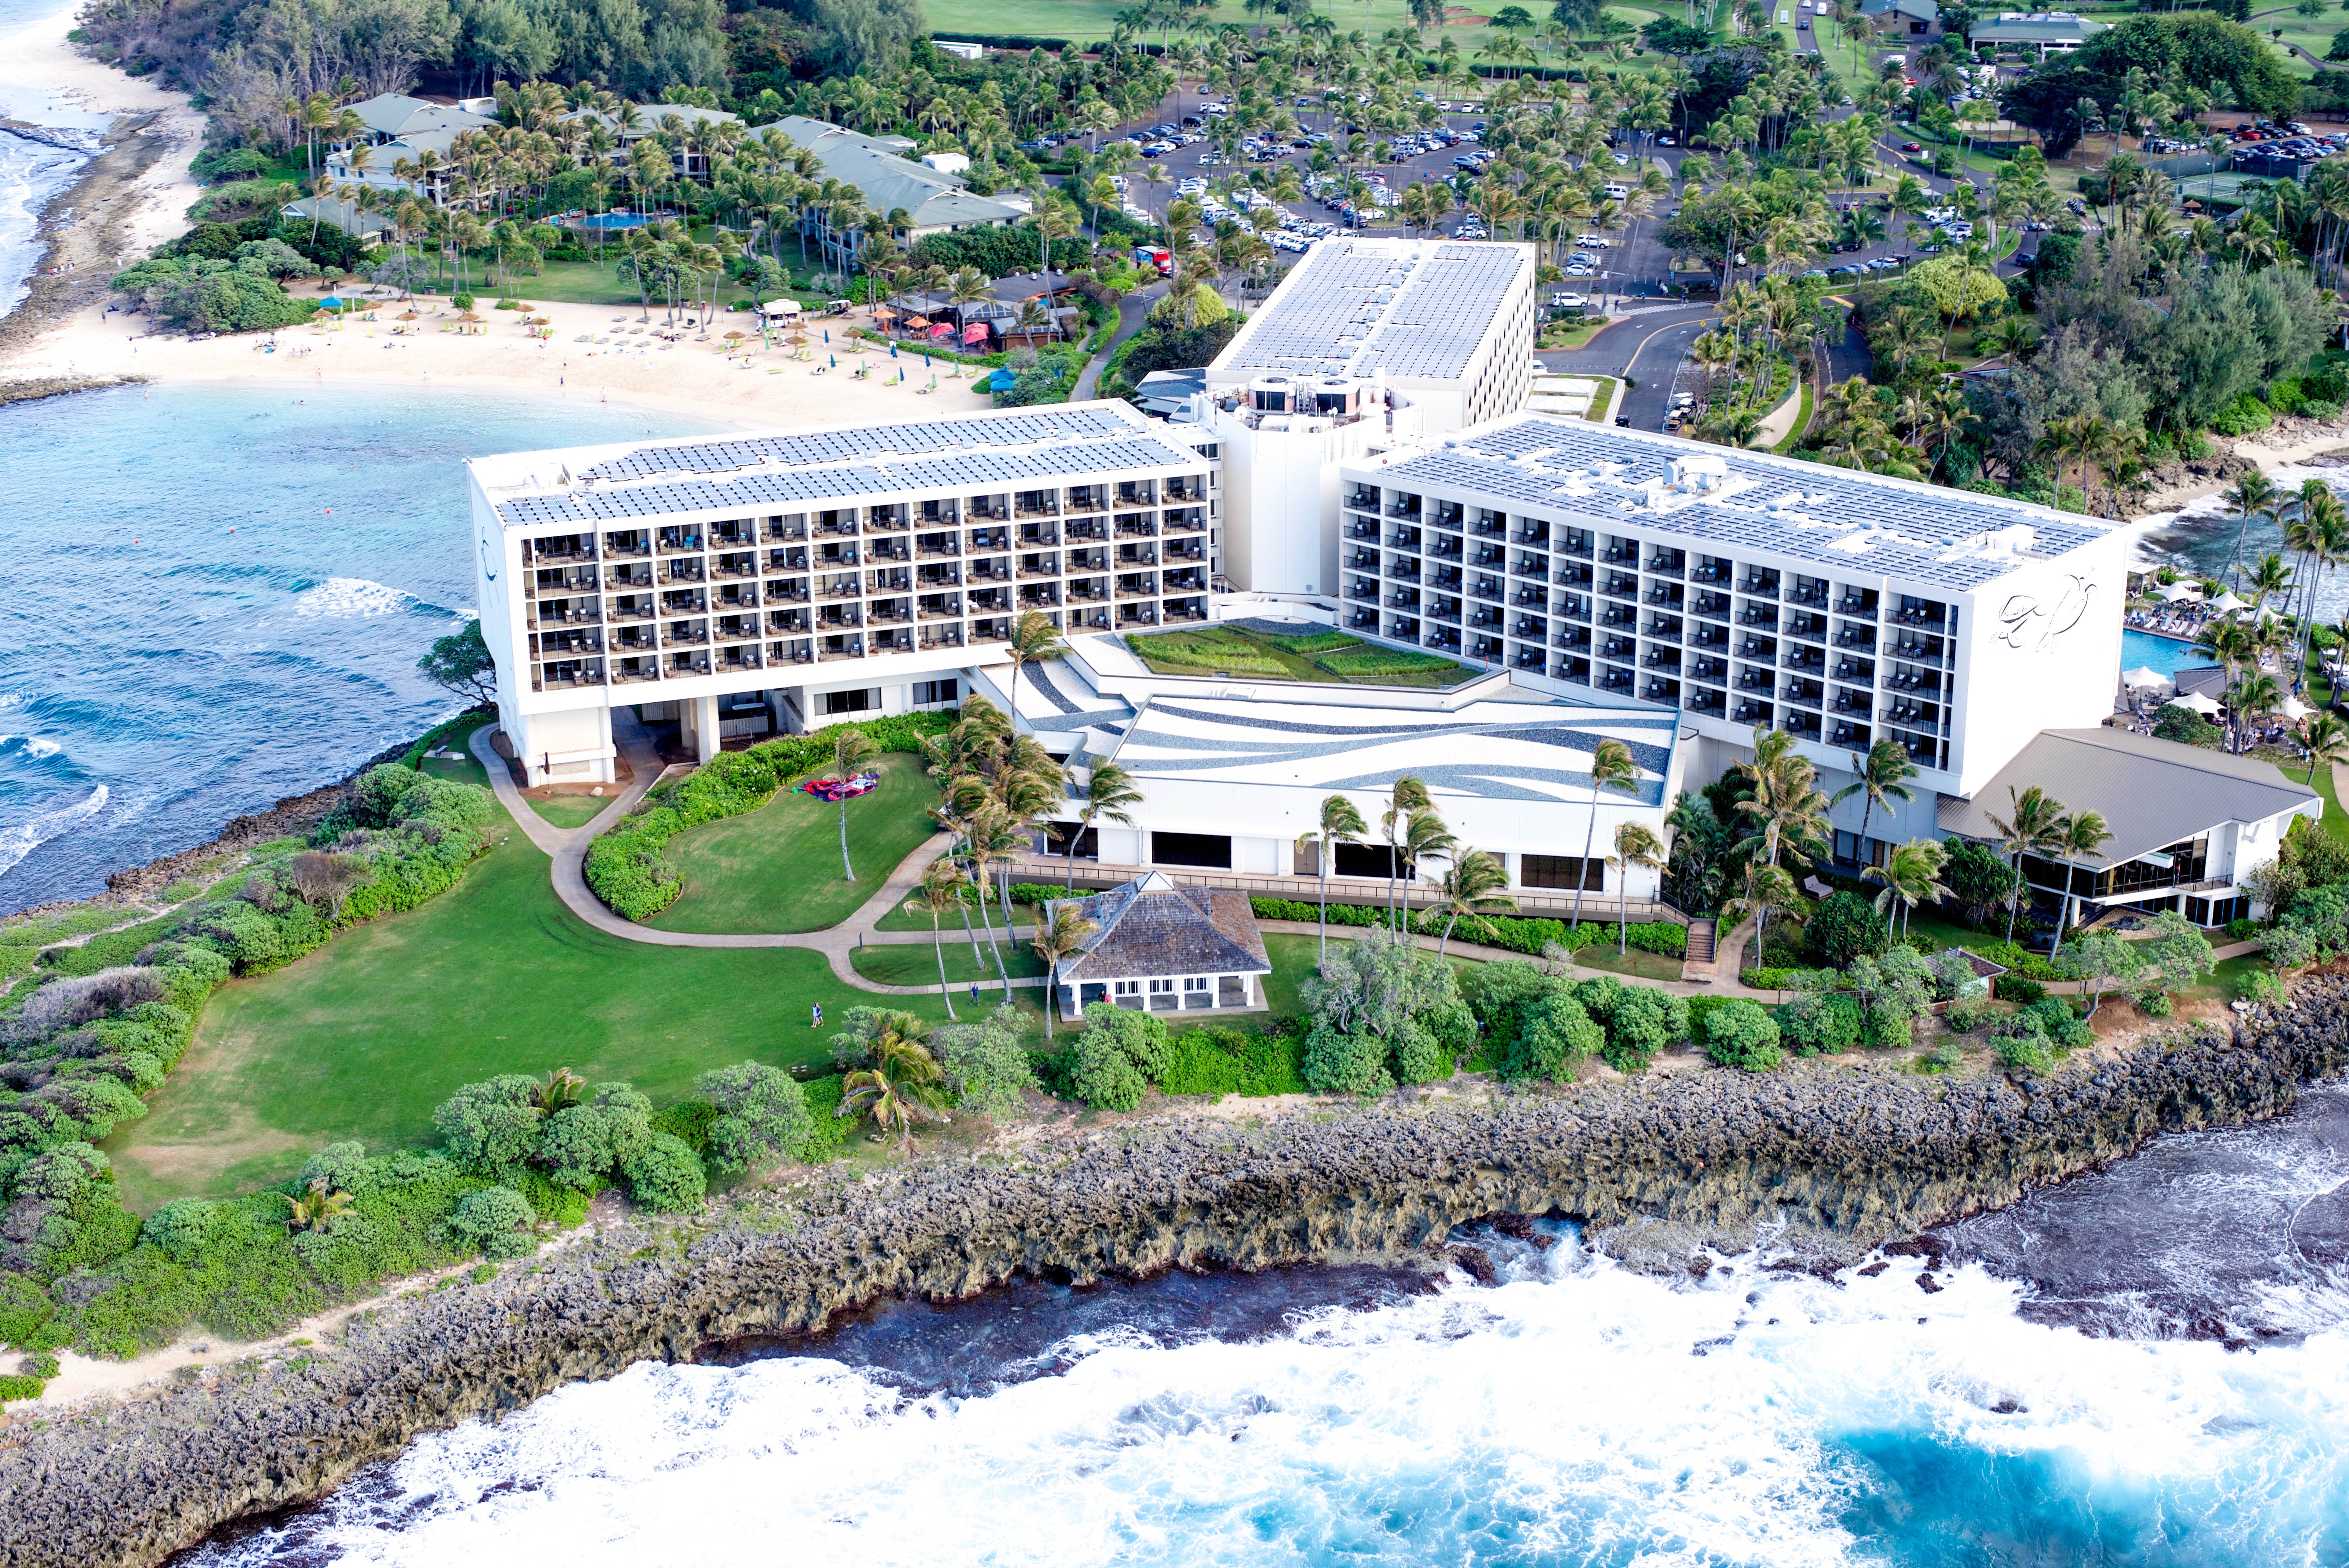 Aerial Photography of Building Near Cliff Beside Body of Water, Architecture, Resort, Water, Tropical, HQ Photo